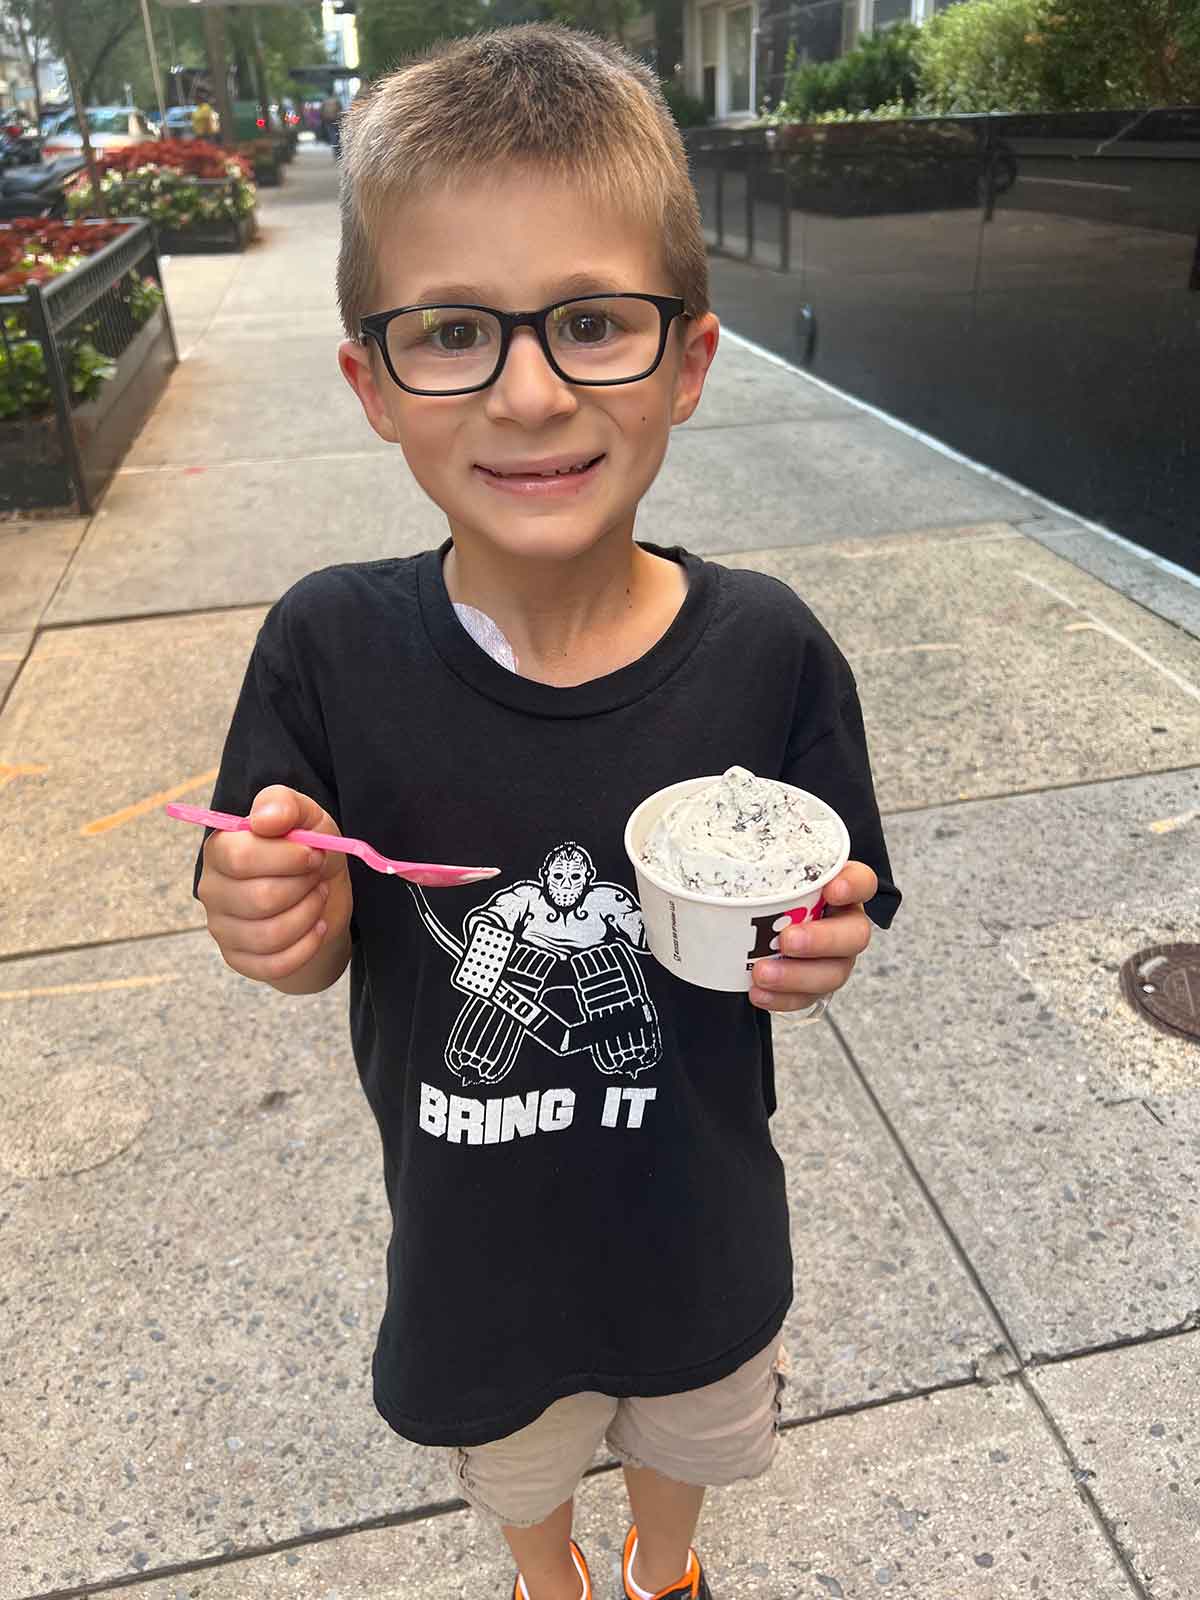 Little boy standing on a city sidewalk holding a cup of ice cream.